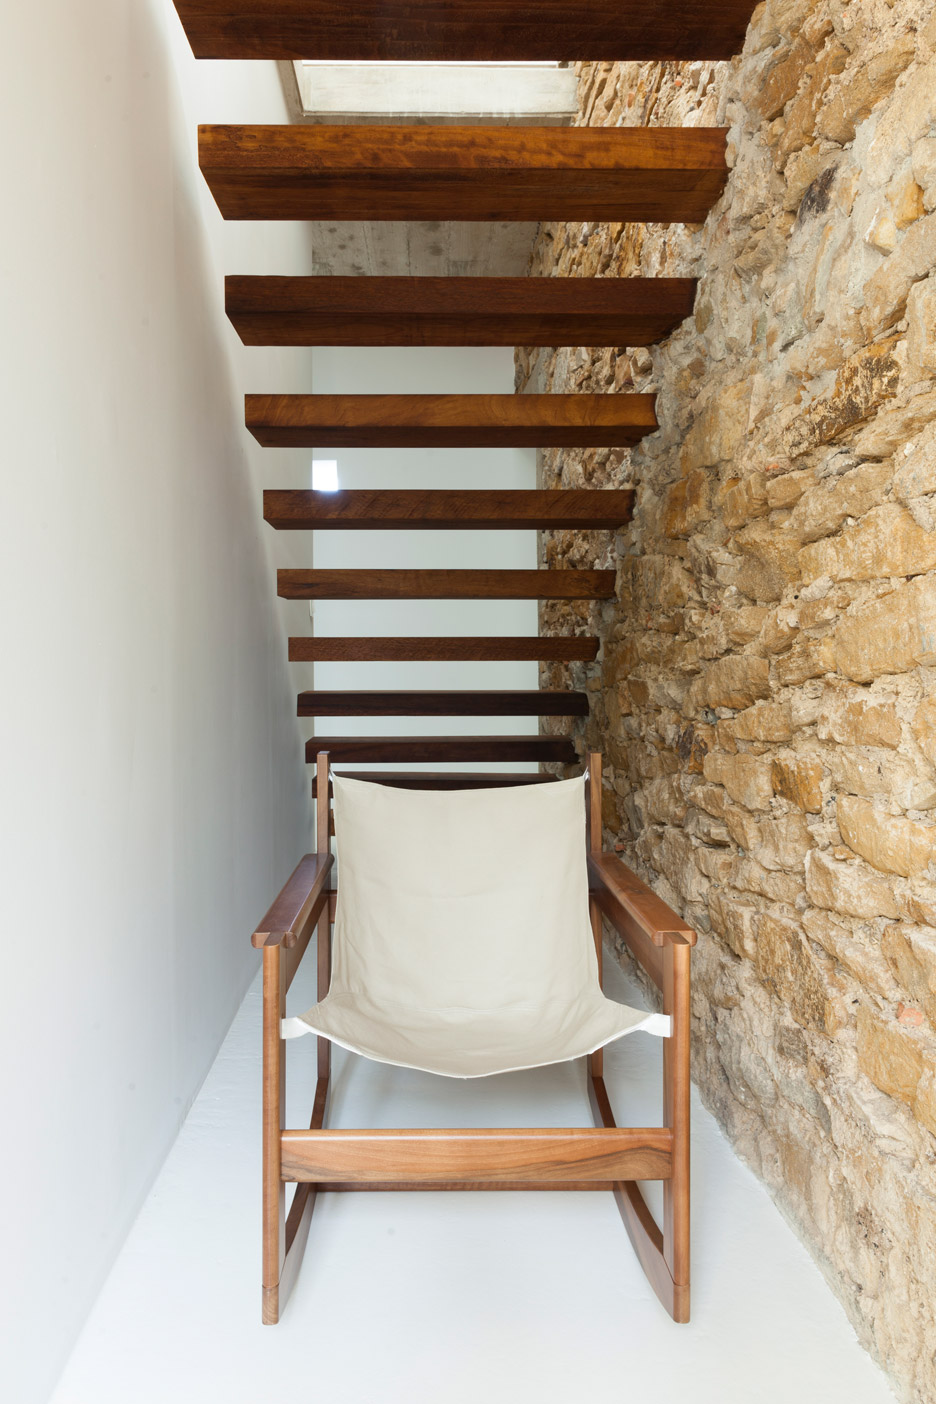 Renovation in Provence by Michael Menuet